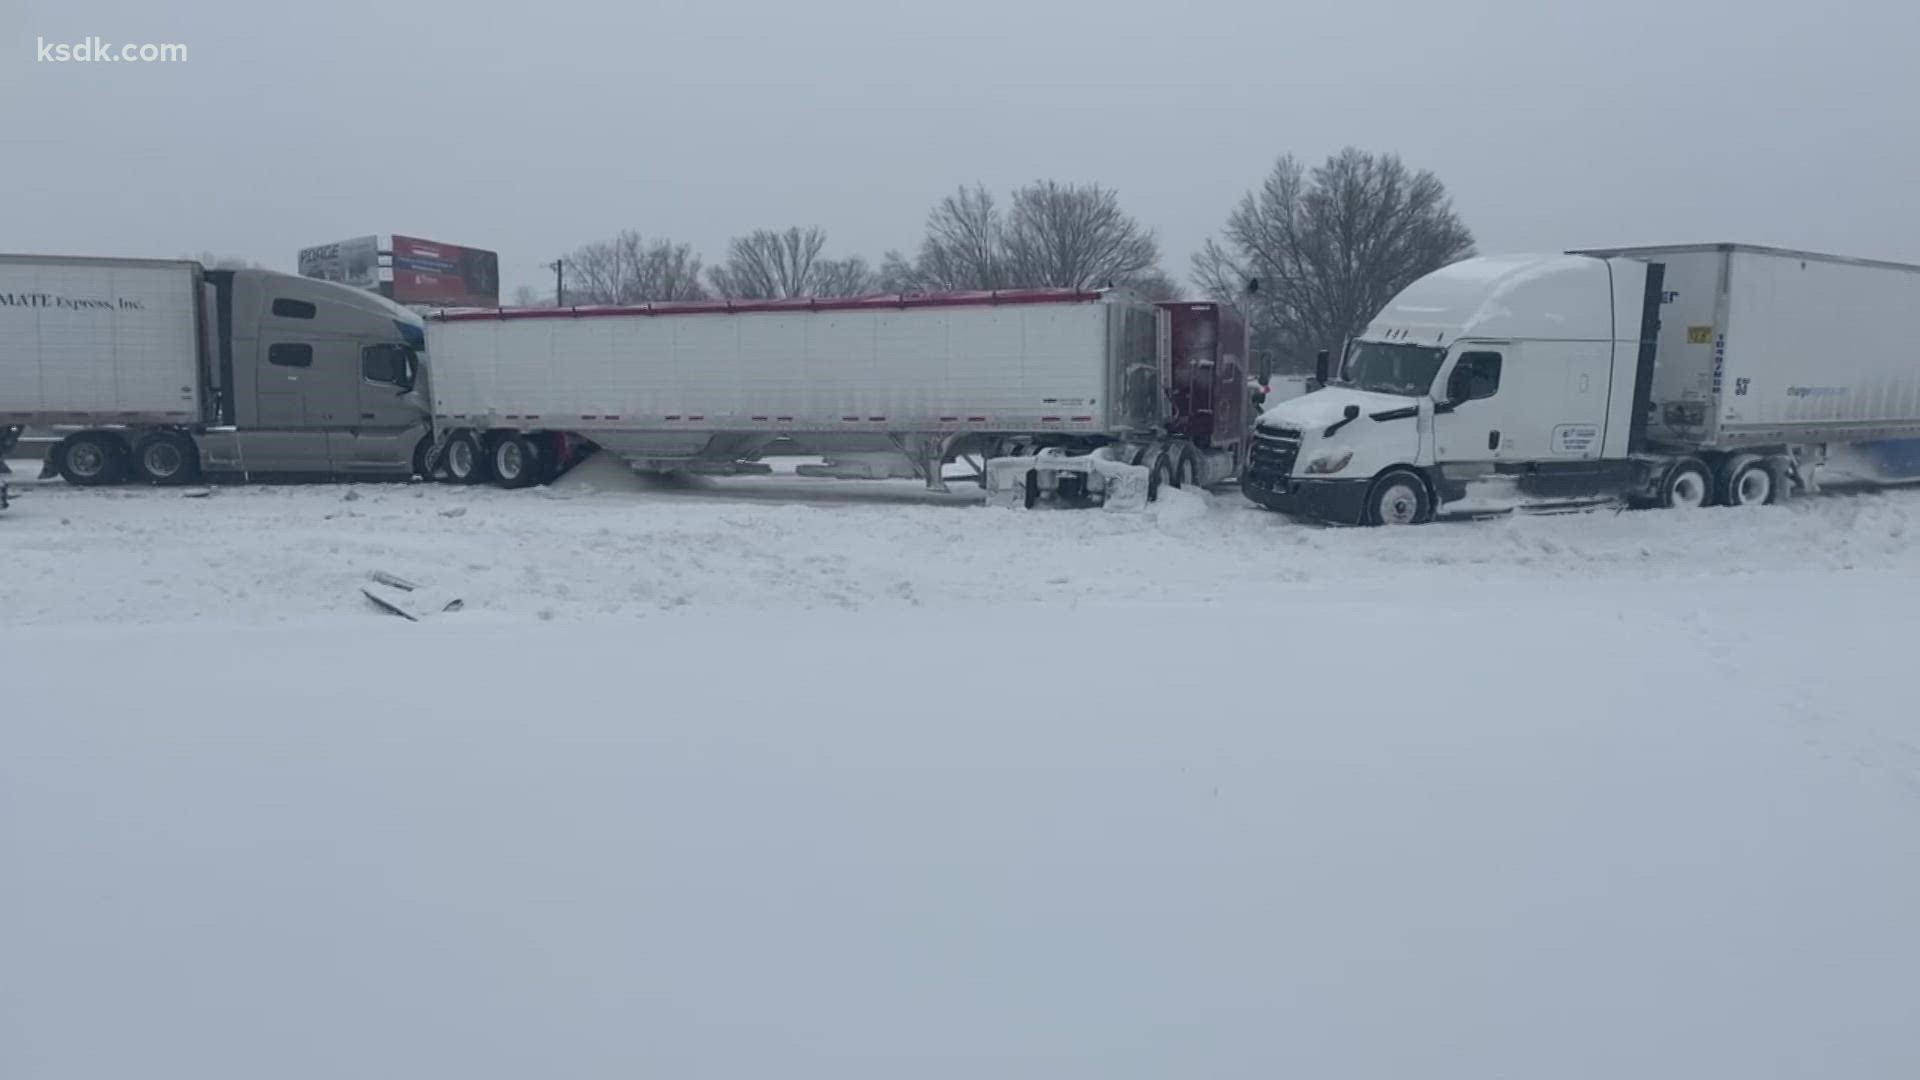 The westbound lanes of Interstate 70 in St. Louis County are shut down after a crash involving a jackknifed tractor-trailer.